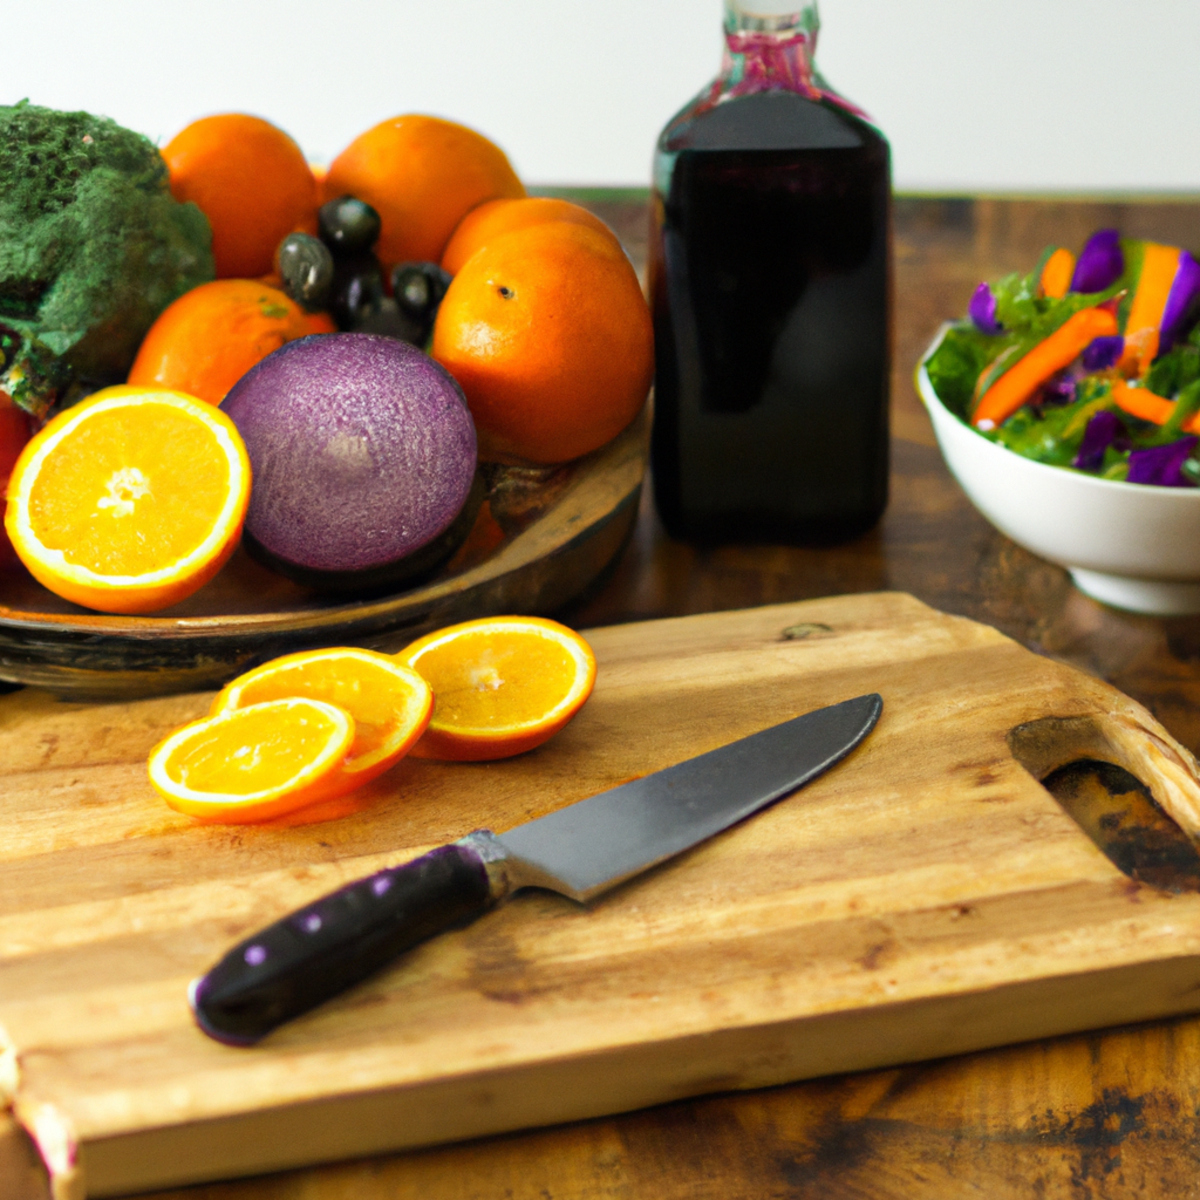 The photo depicts a colorful array of fresh fruits and vegetables arranged on a wooden cutting board. The vibrant hues of the produce, including deep greens, bright oranges, and rich purples, are striking against the natural wood backdrop. A sharp knife and a small bowl of olive oil sit nearby, suggesting the preparation of a healthy meal. The image captures the essence of a whole-food plant-based diet, emphasizing the importance of consuming nutrient-dense, unprocessed foods to promote natural healing and wellness.